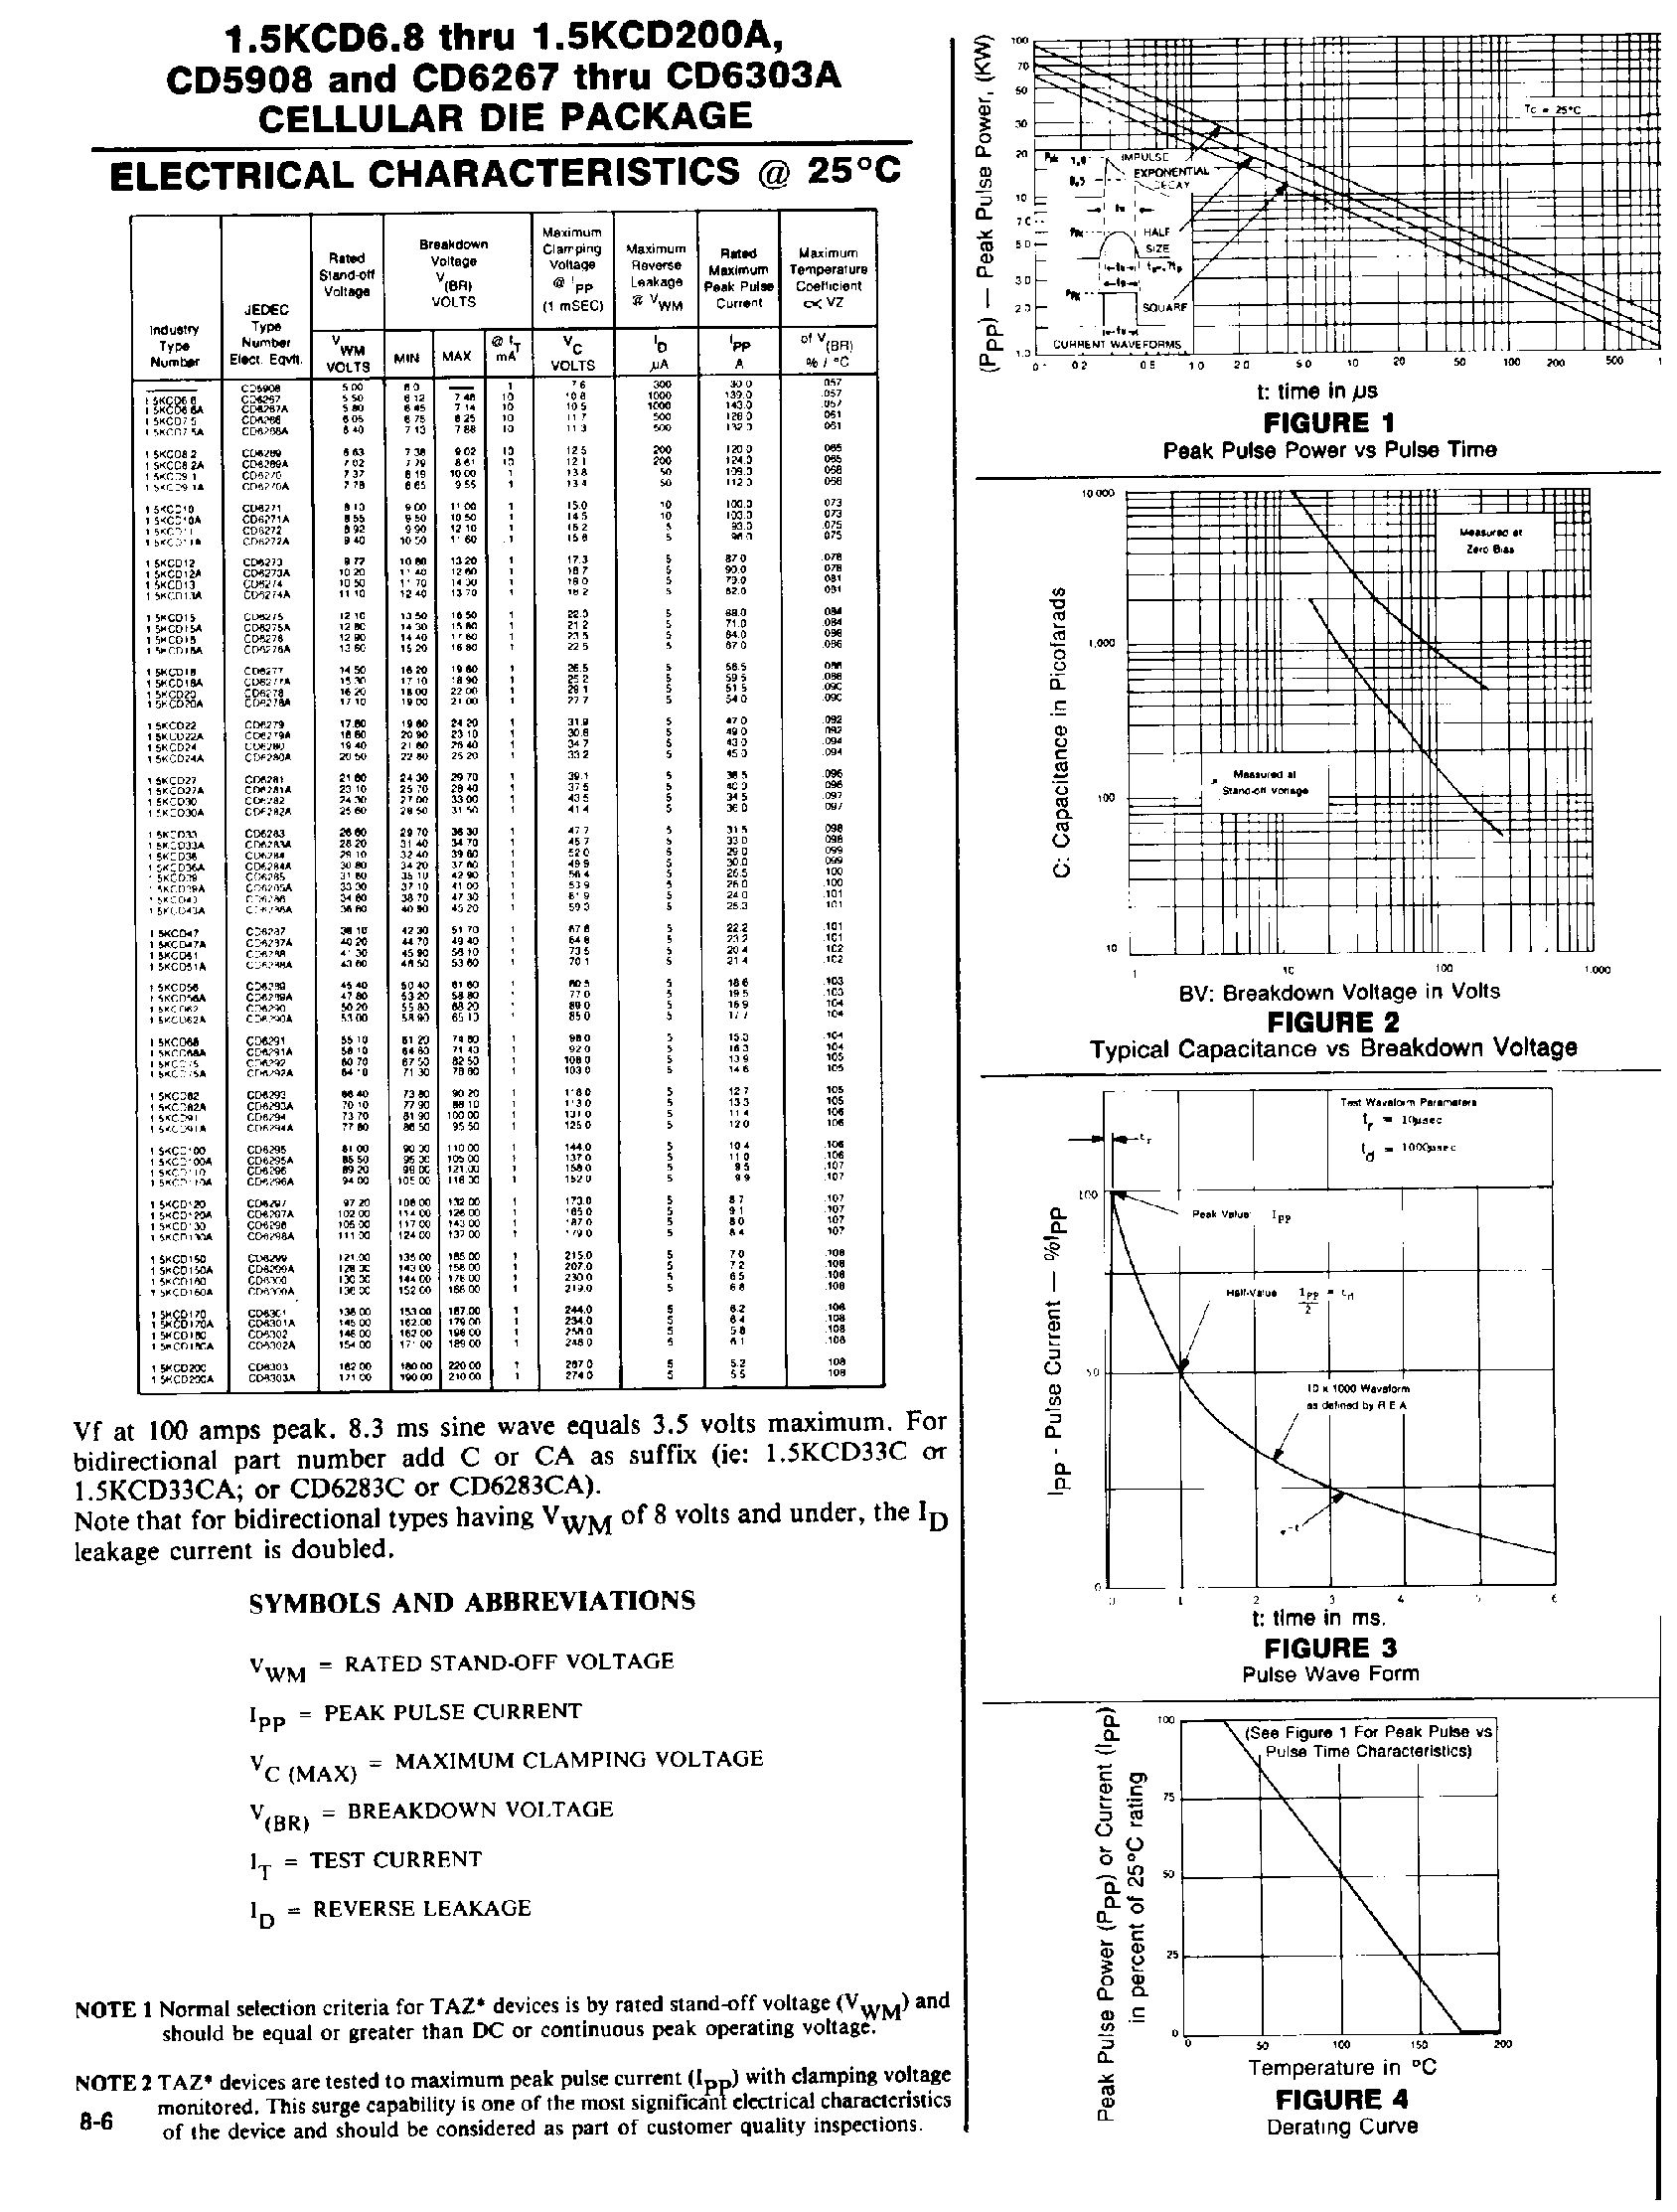 Datasheet CD6292A - Transient suppressor CELLULAR DIE PACKAGE page 2